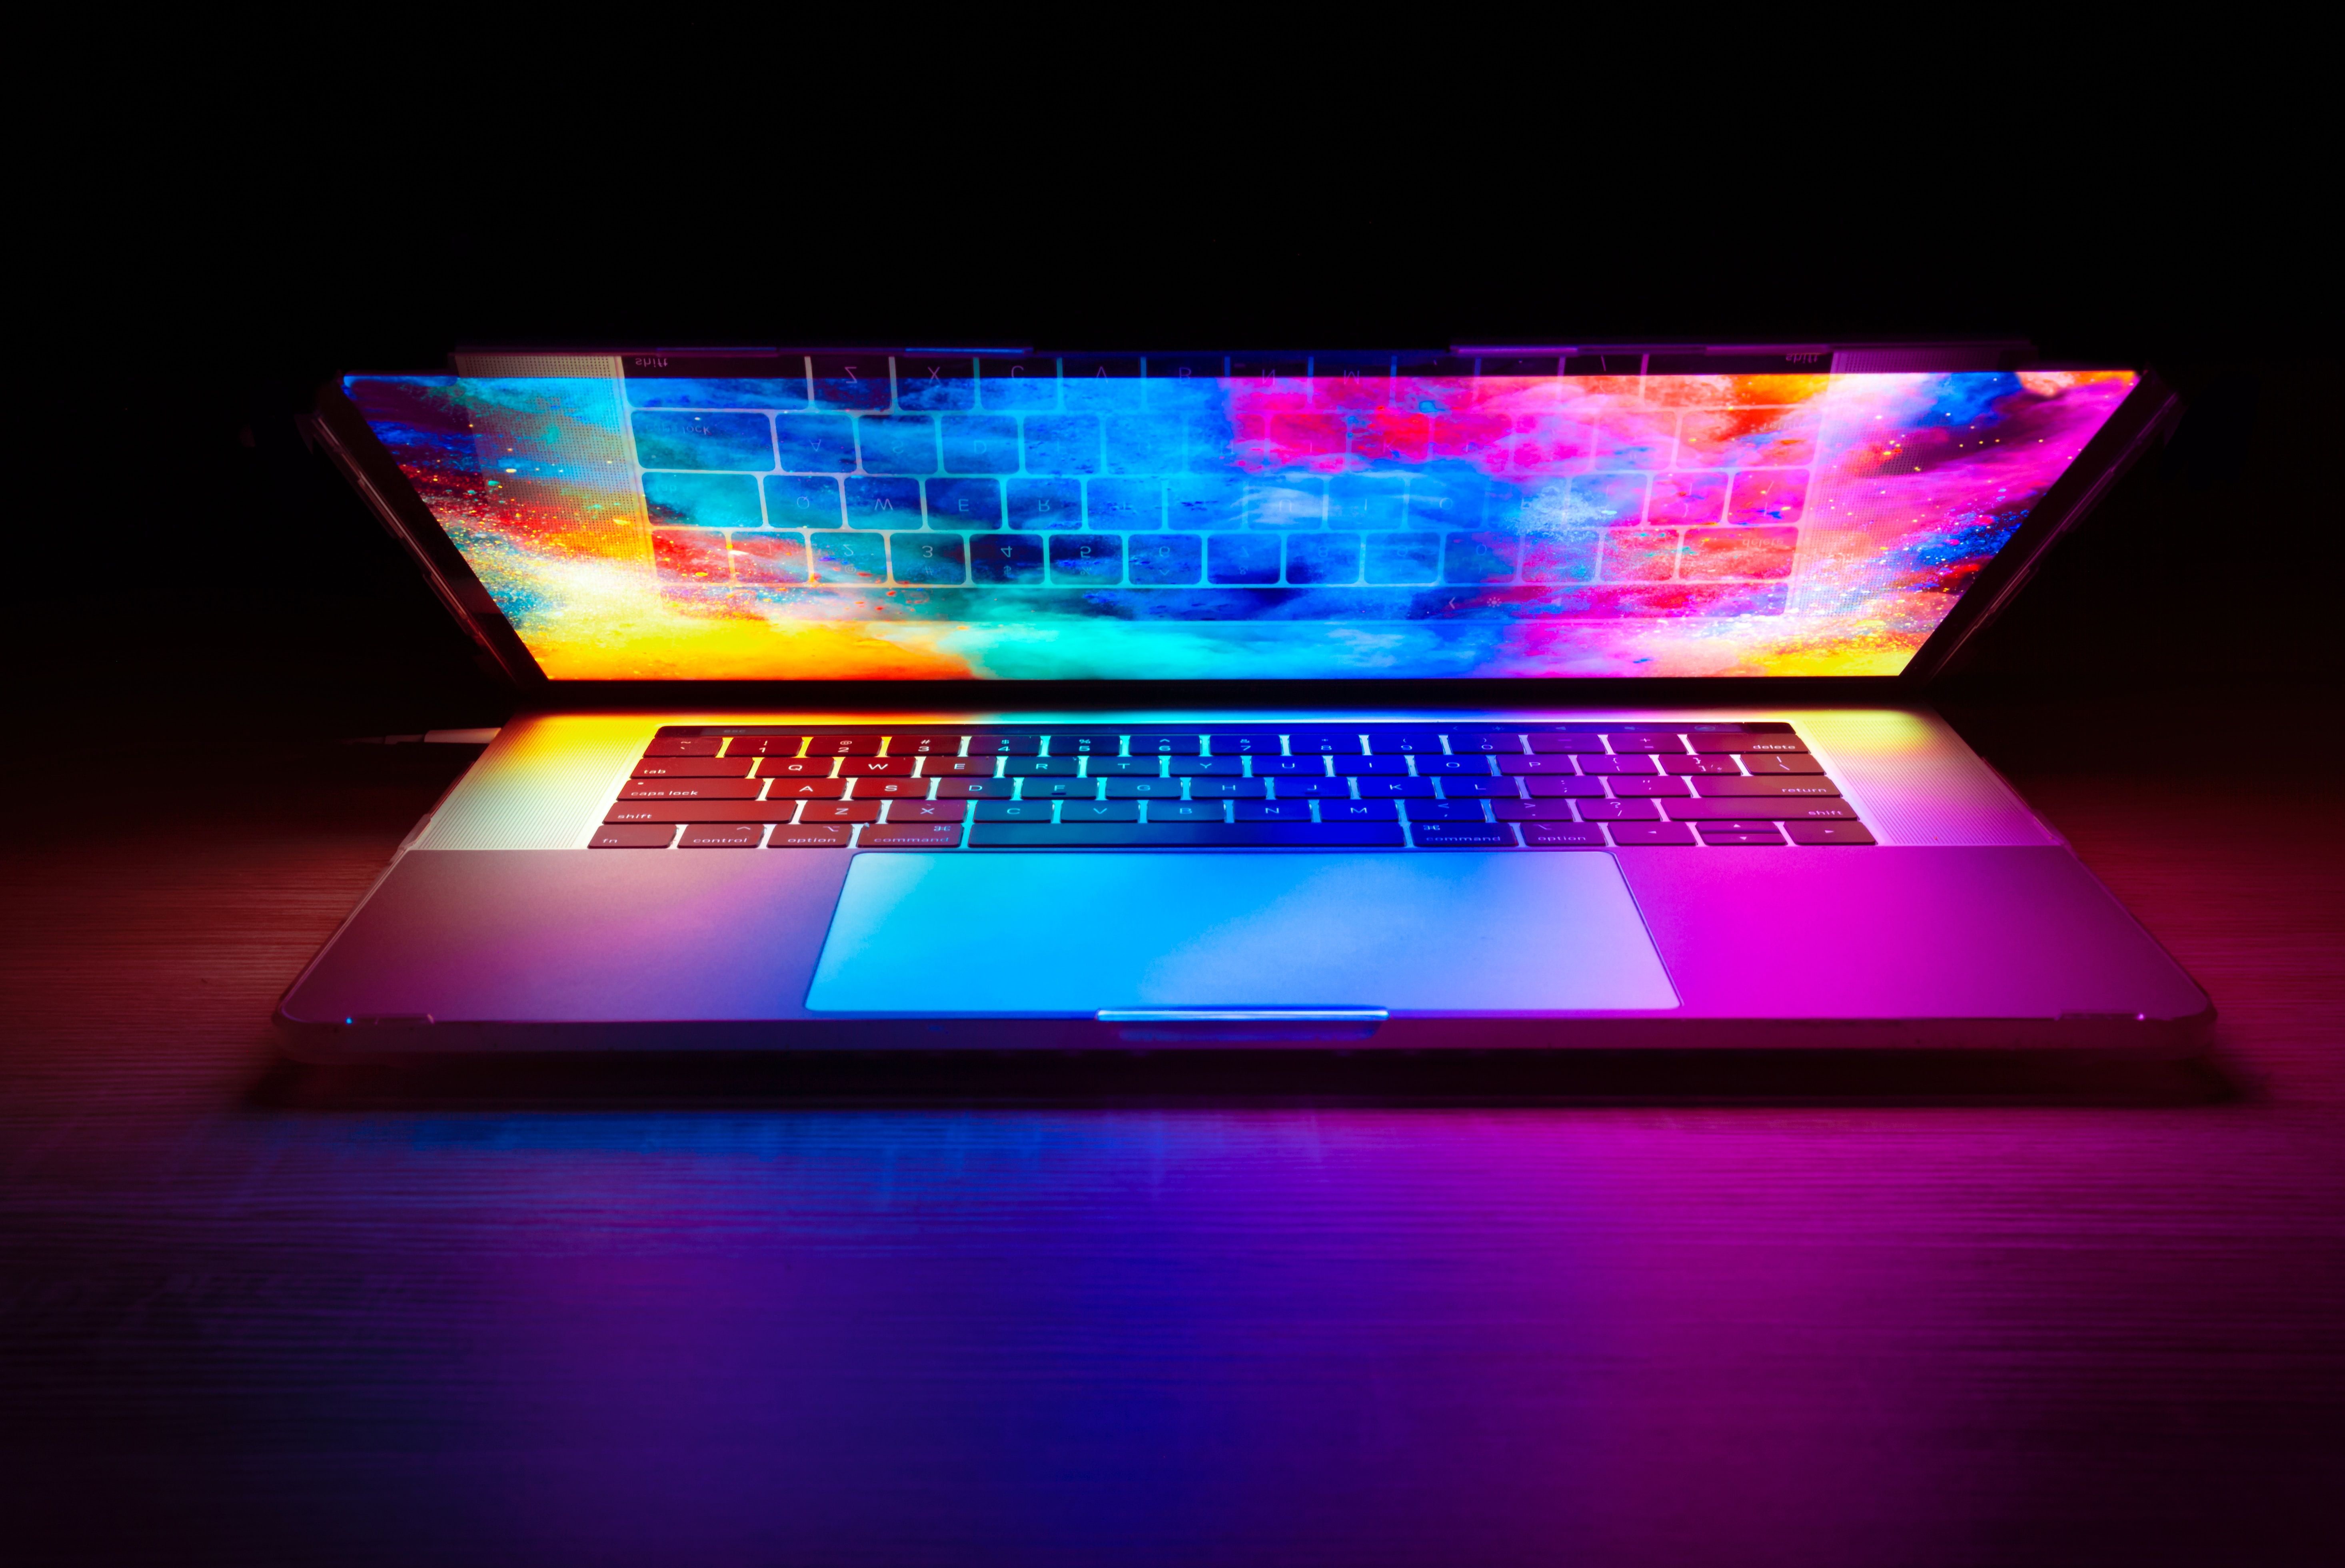 image of an opened laptop with a dark and colorful background